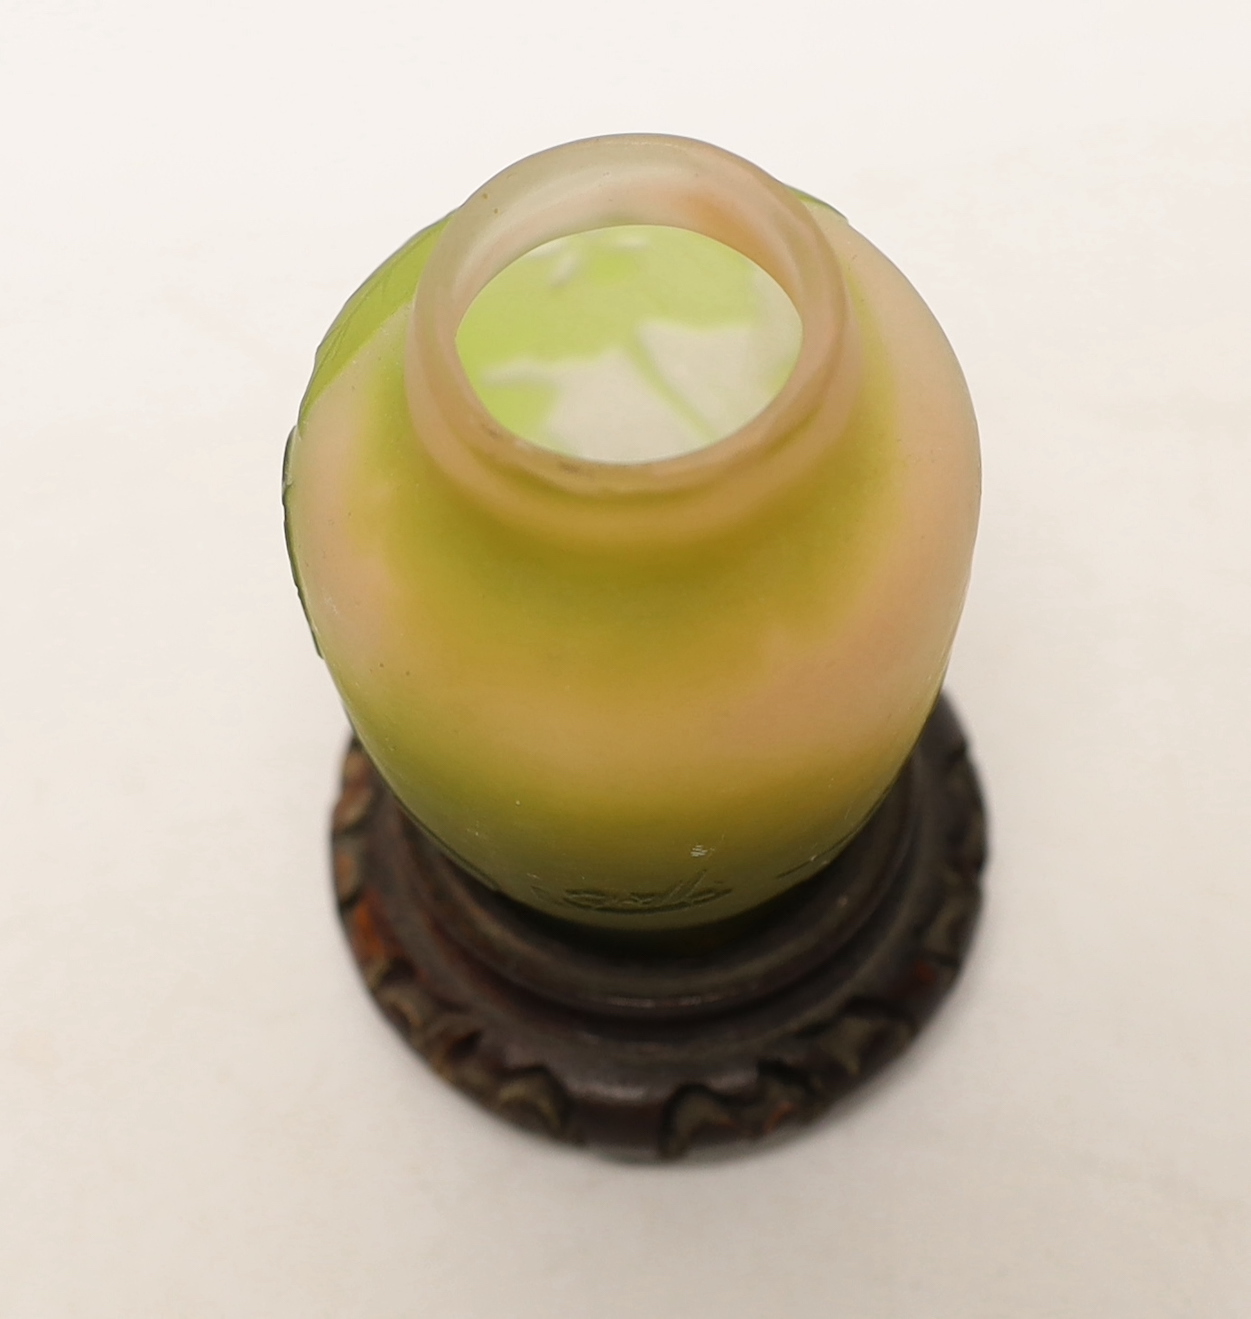 A small Gallé cameo glass vase, attached to hardwood base, 10cm